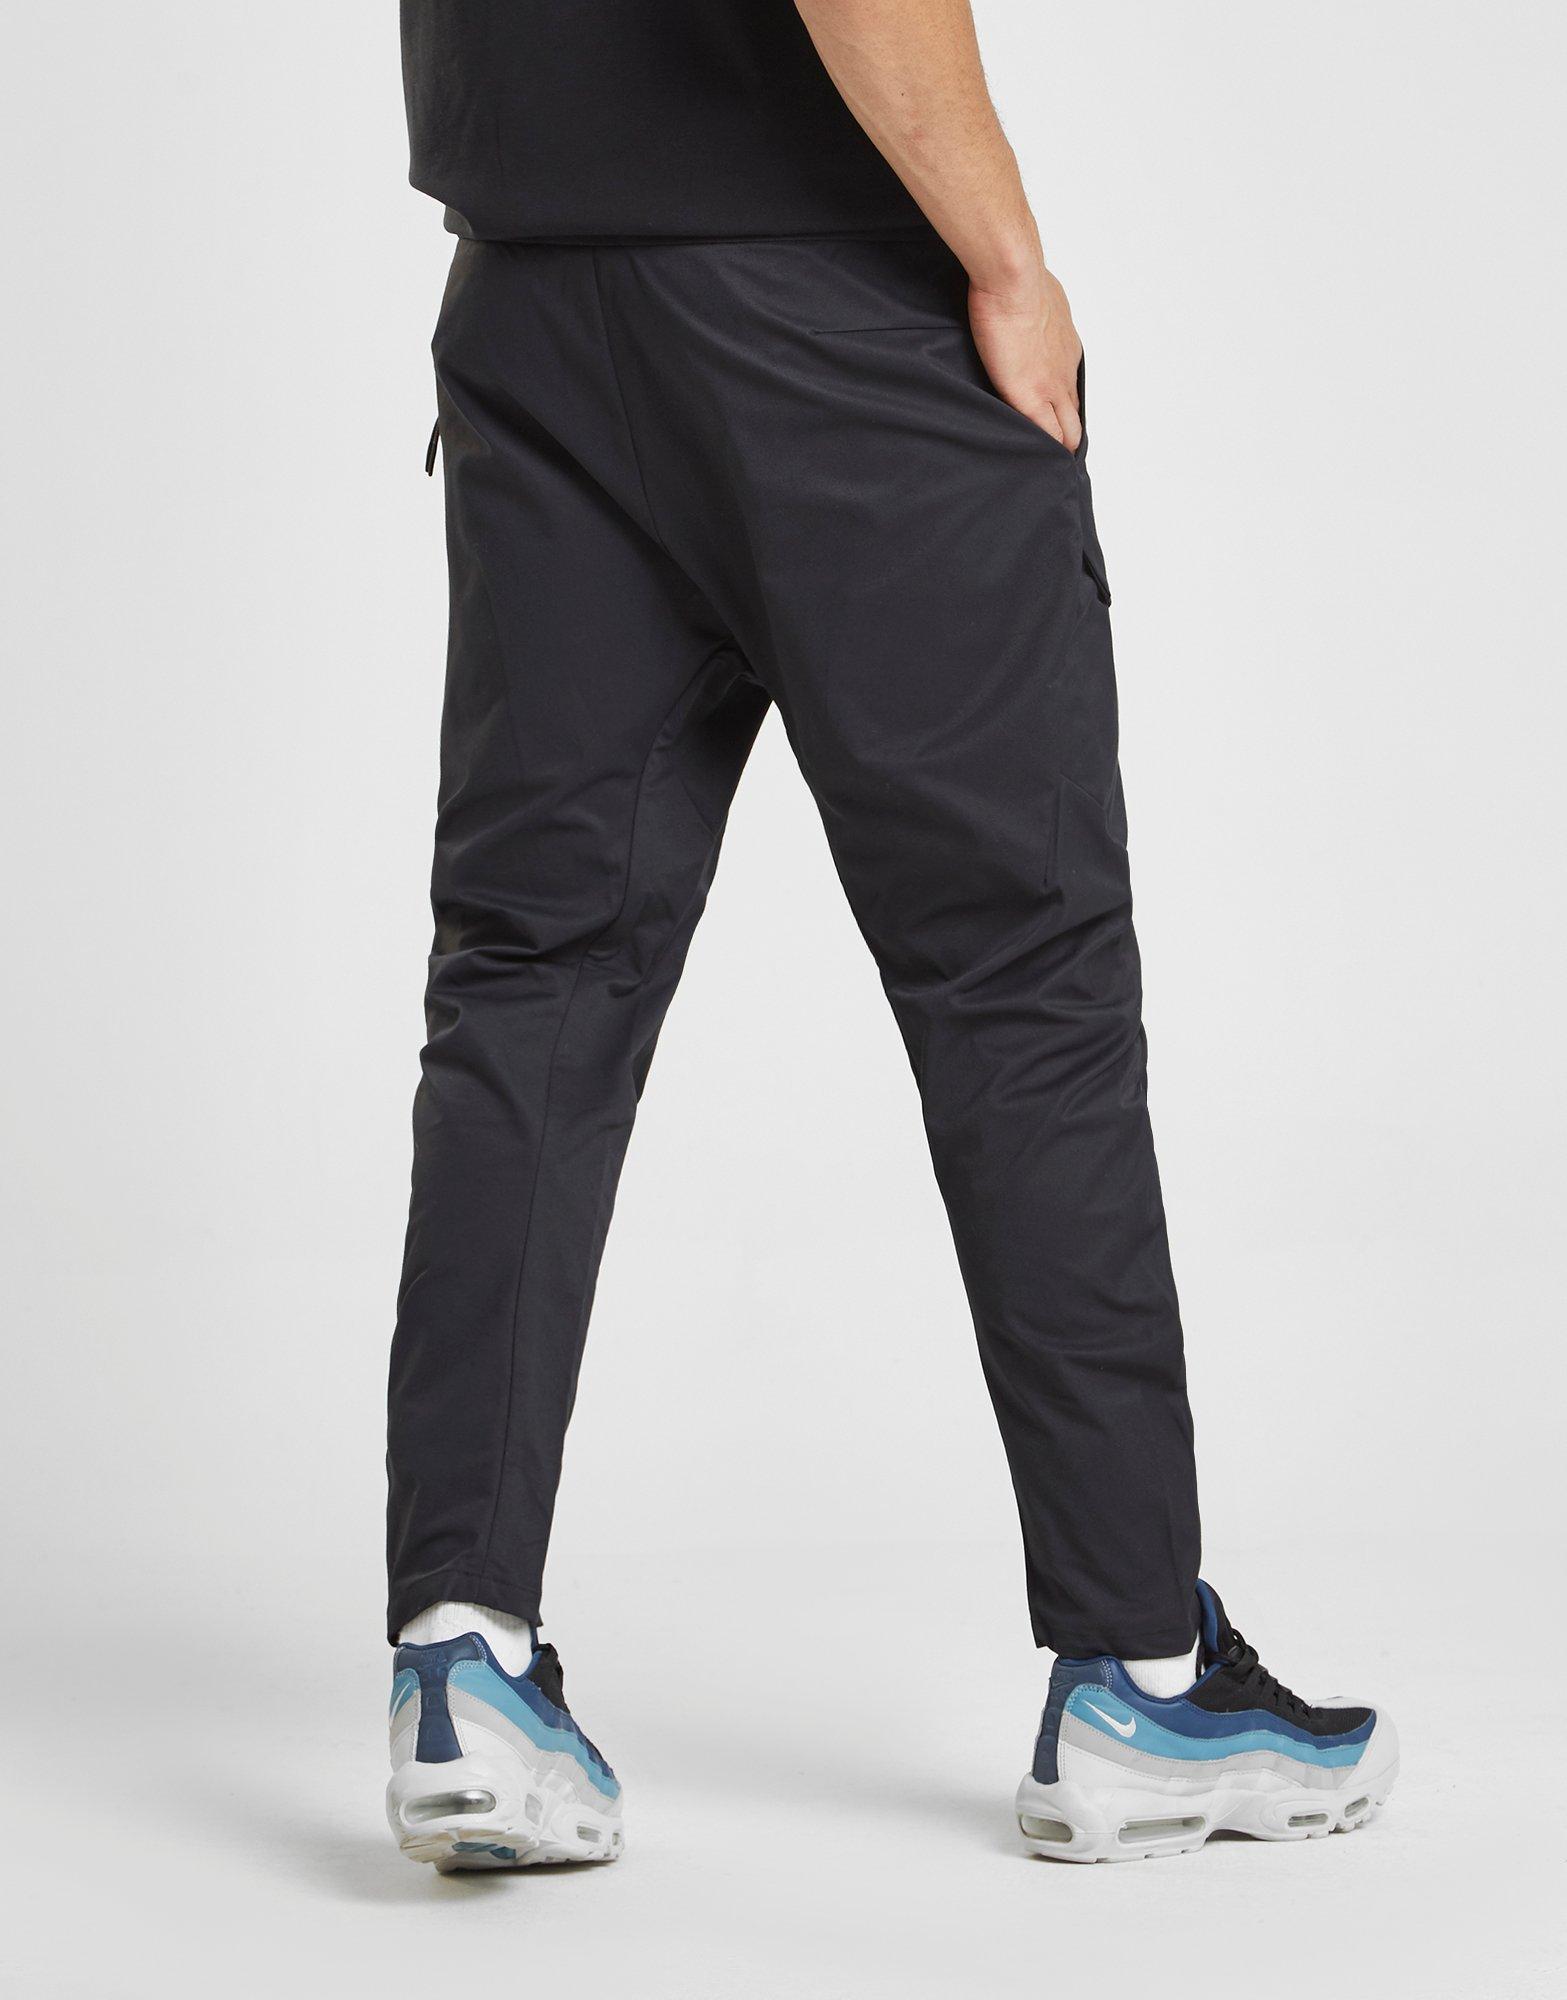 Nike Cotton Tech Pack Cargo Pants in Black for Men - Lyst